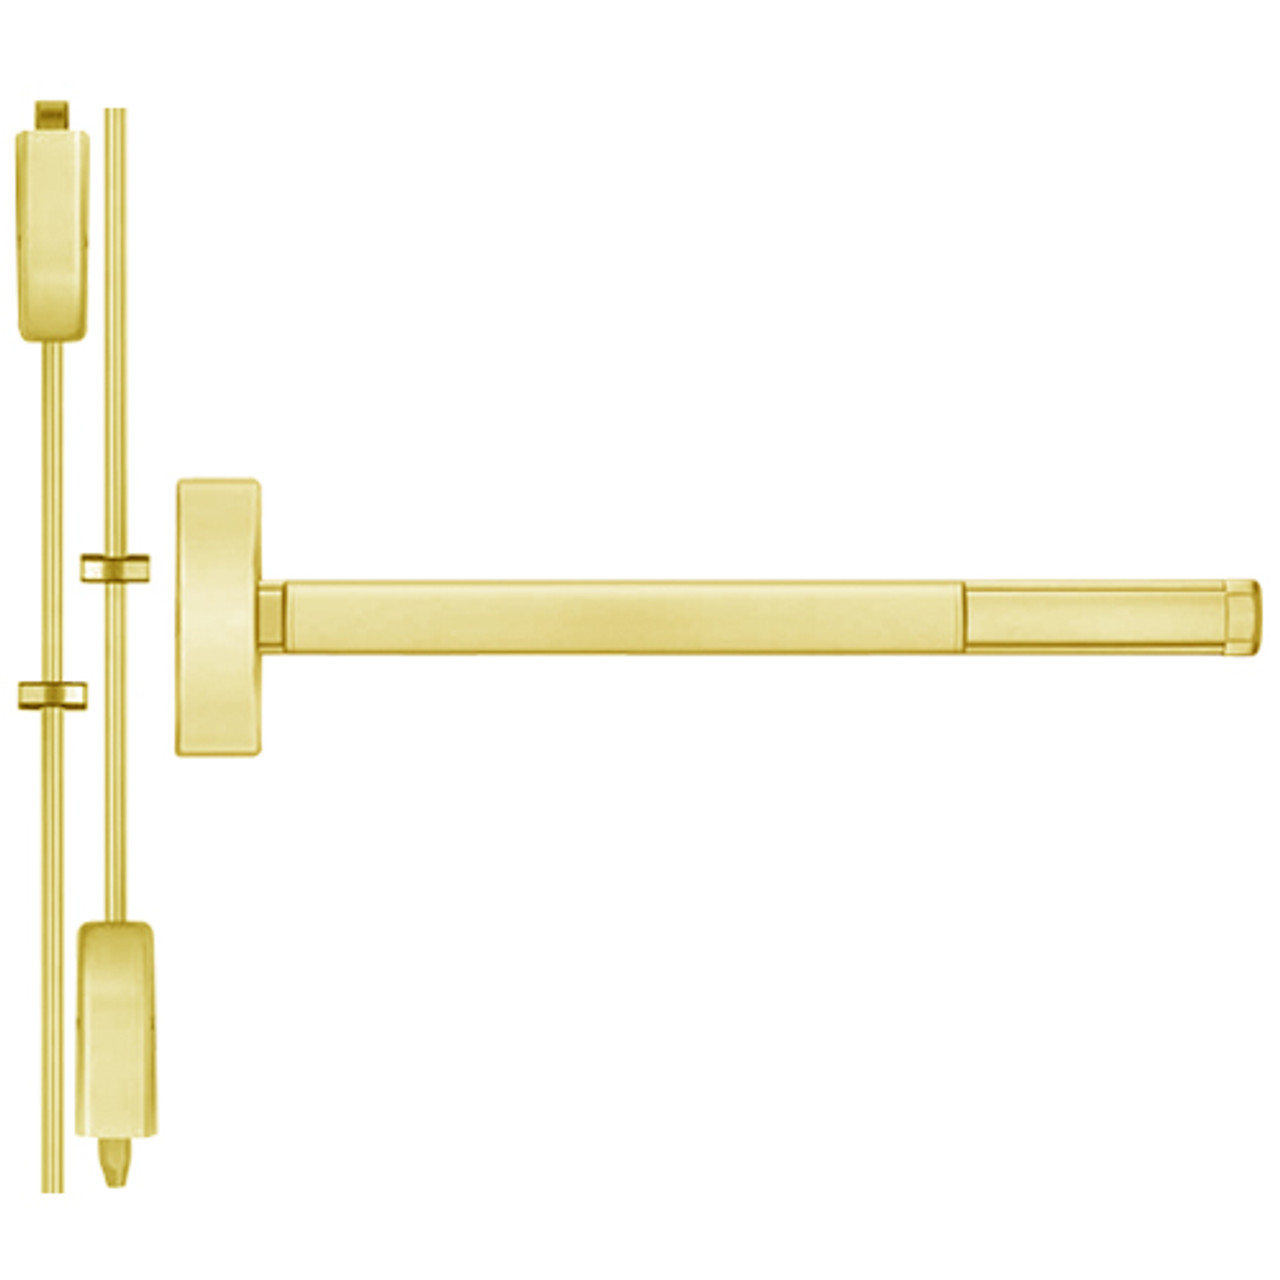 DE2201LBR-605-36 PHI 2200 Series Non Fire Rated Apex Surface Vertical Rod Device with Delayed Egress Prepped for Cover Plate in Bright Brass Finish